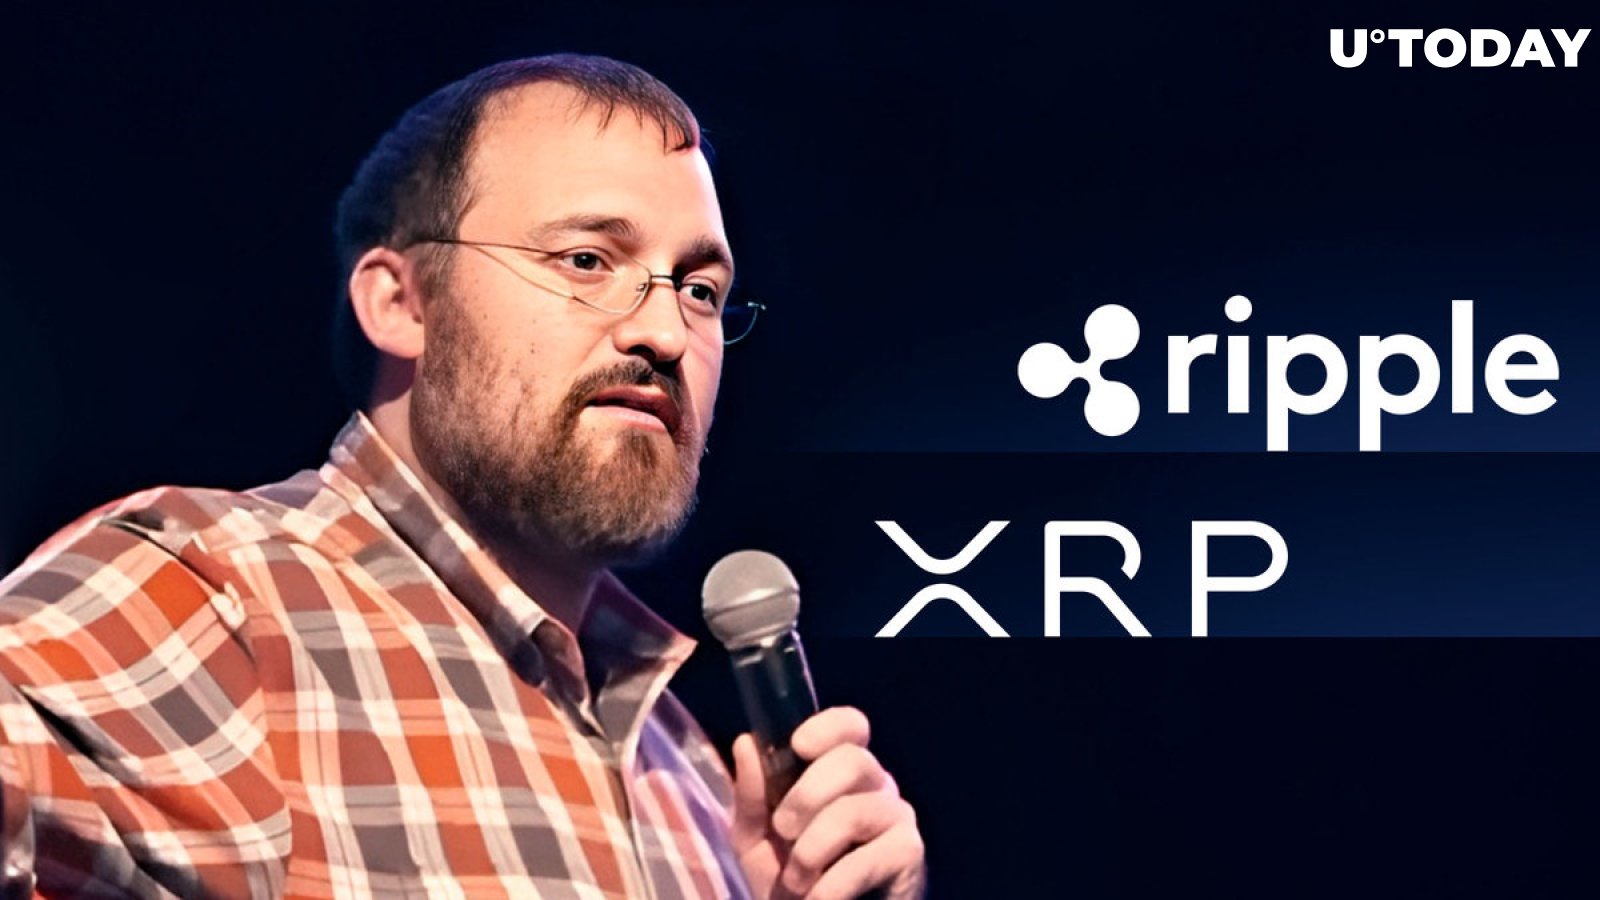 Cardano Creator puts an end to the Ripple and XRP question